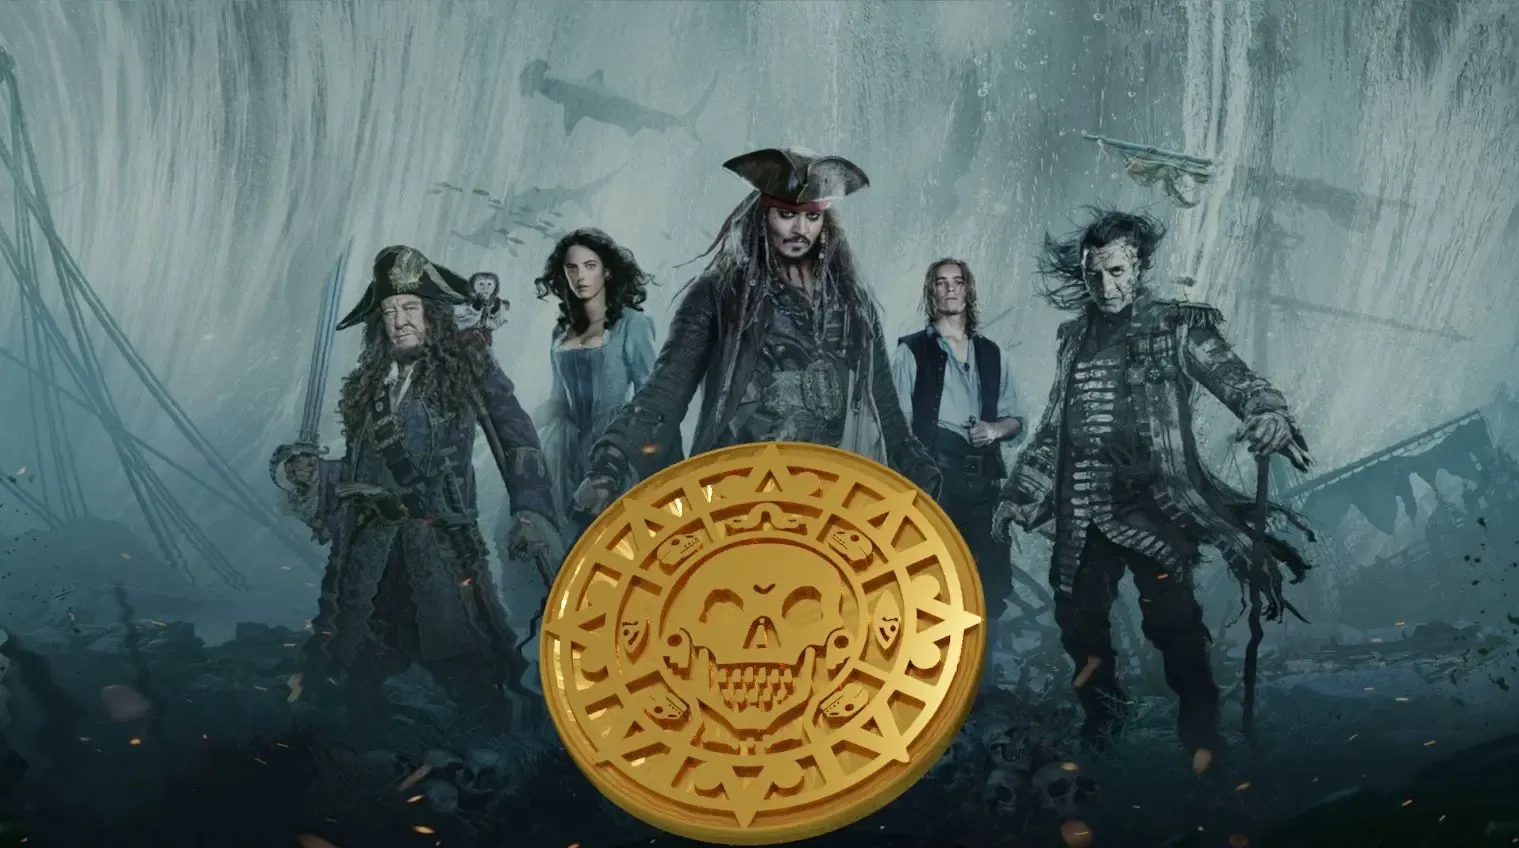 pirate of the caribbean coin